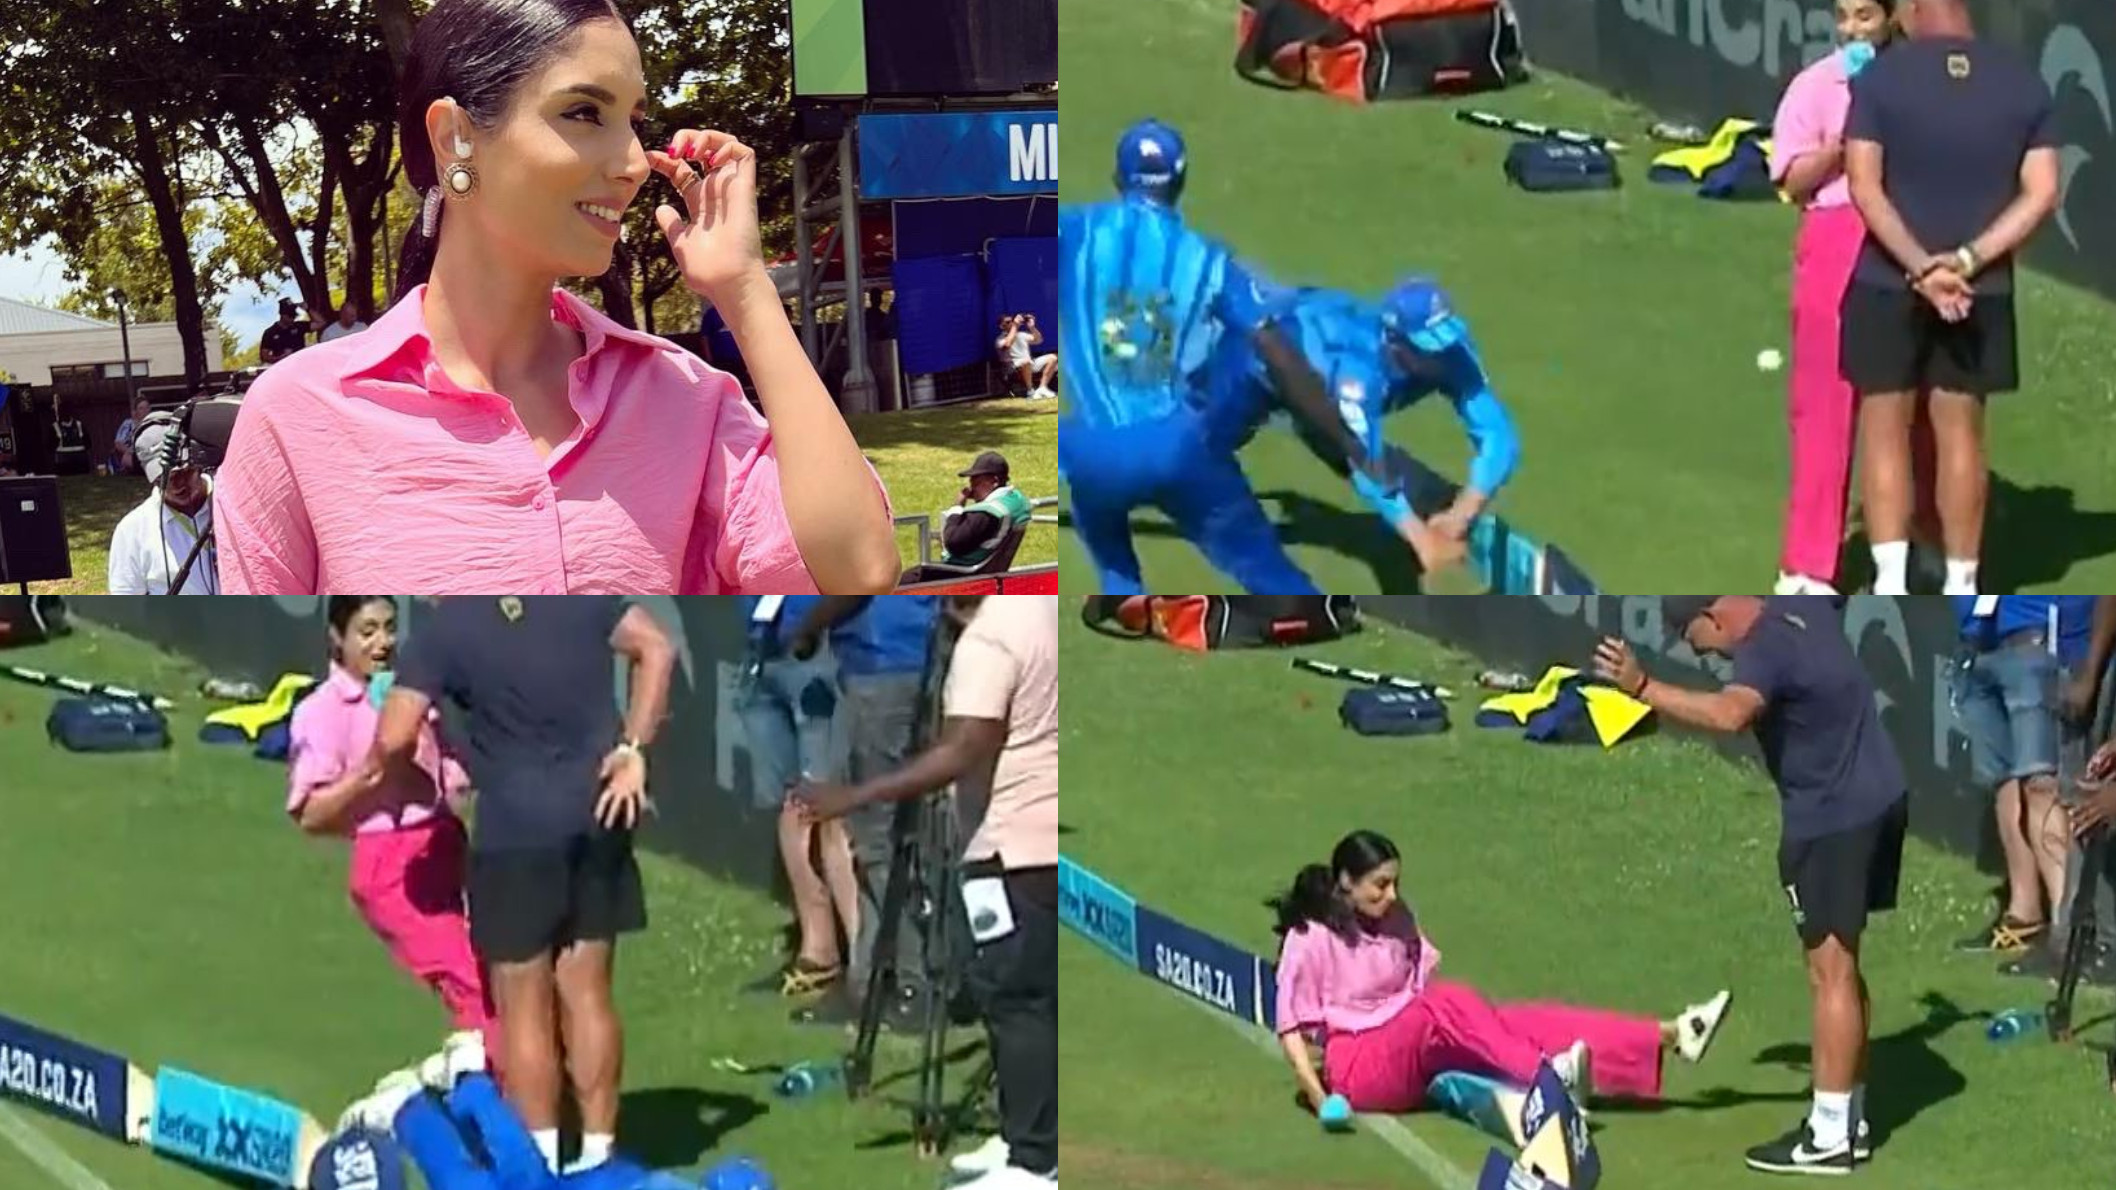 SA20 2023: WATCH- Presenter Zainab Abbas takes a tumble after fielder crashes into her near boundary ropes